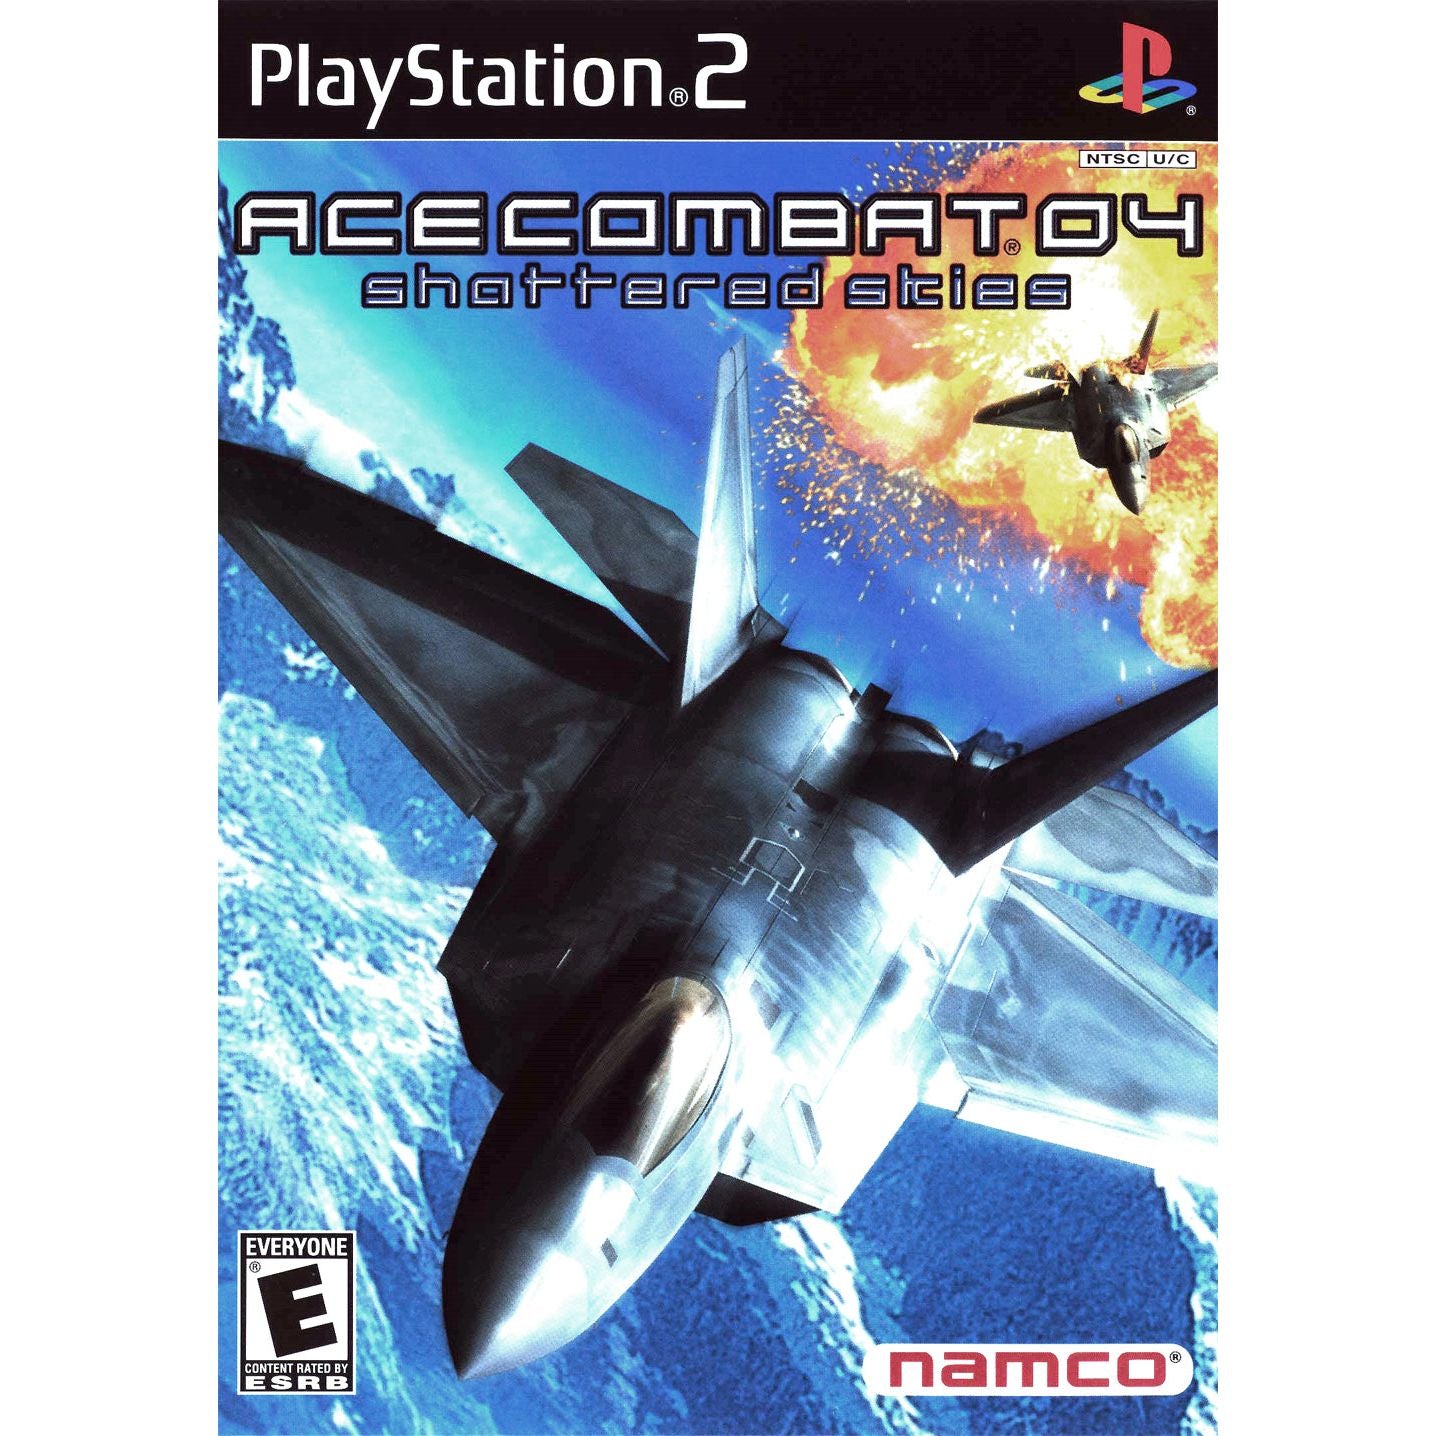 ACE COMBAT 4 SHATTERED SKIES